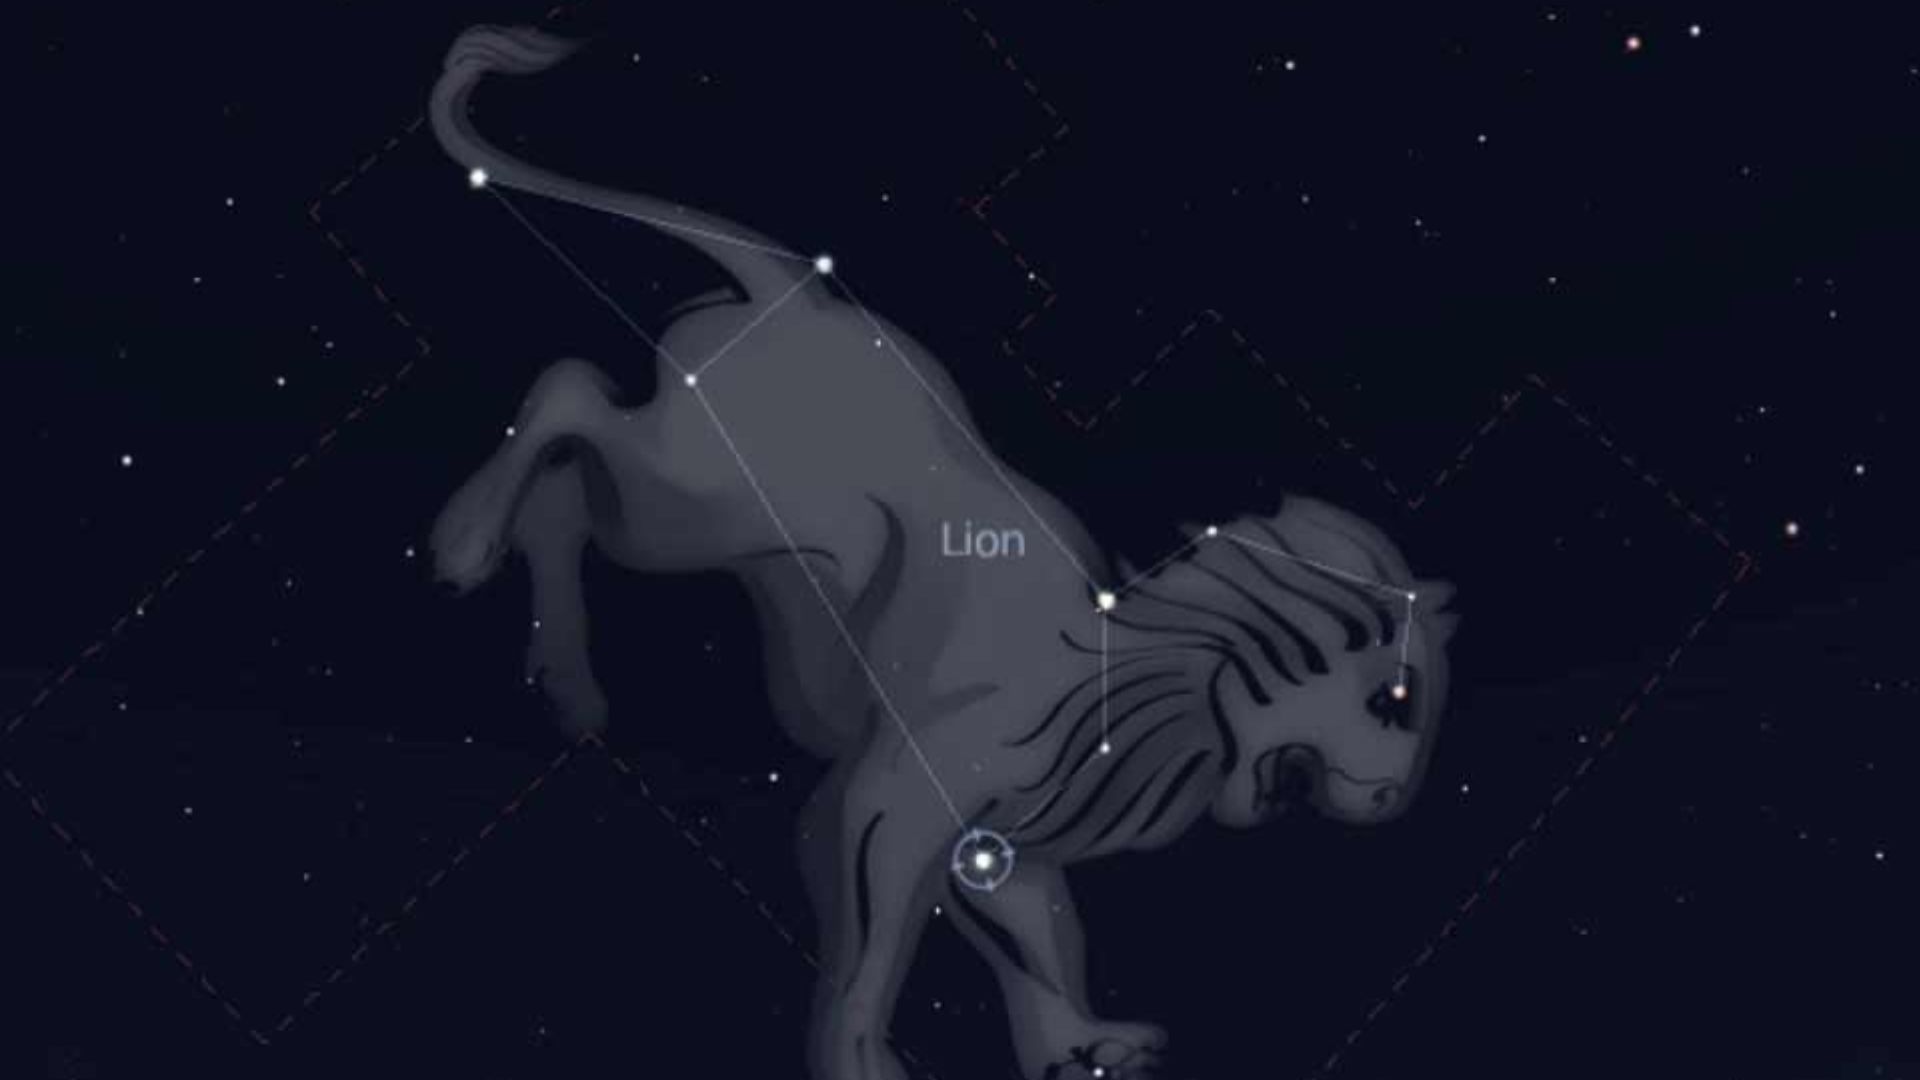 A constellation forming a lion.